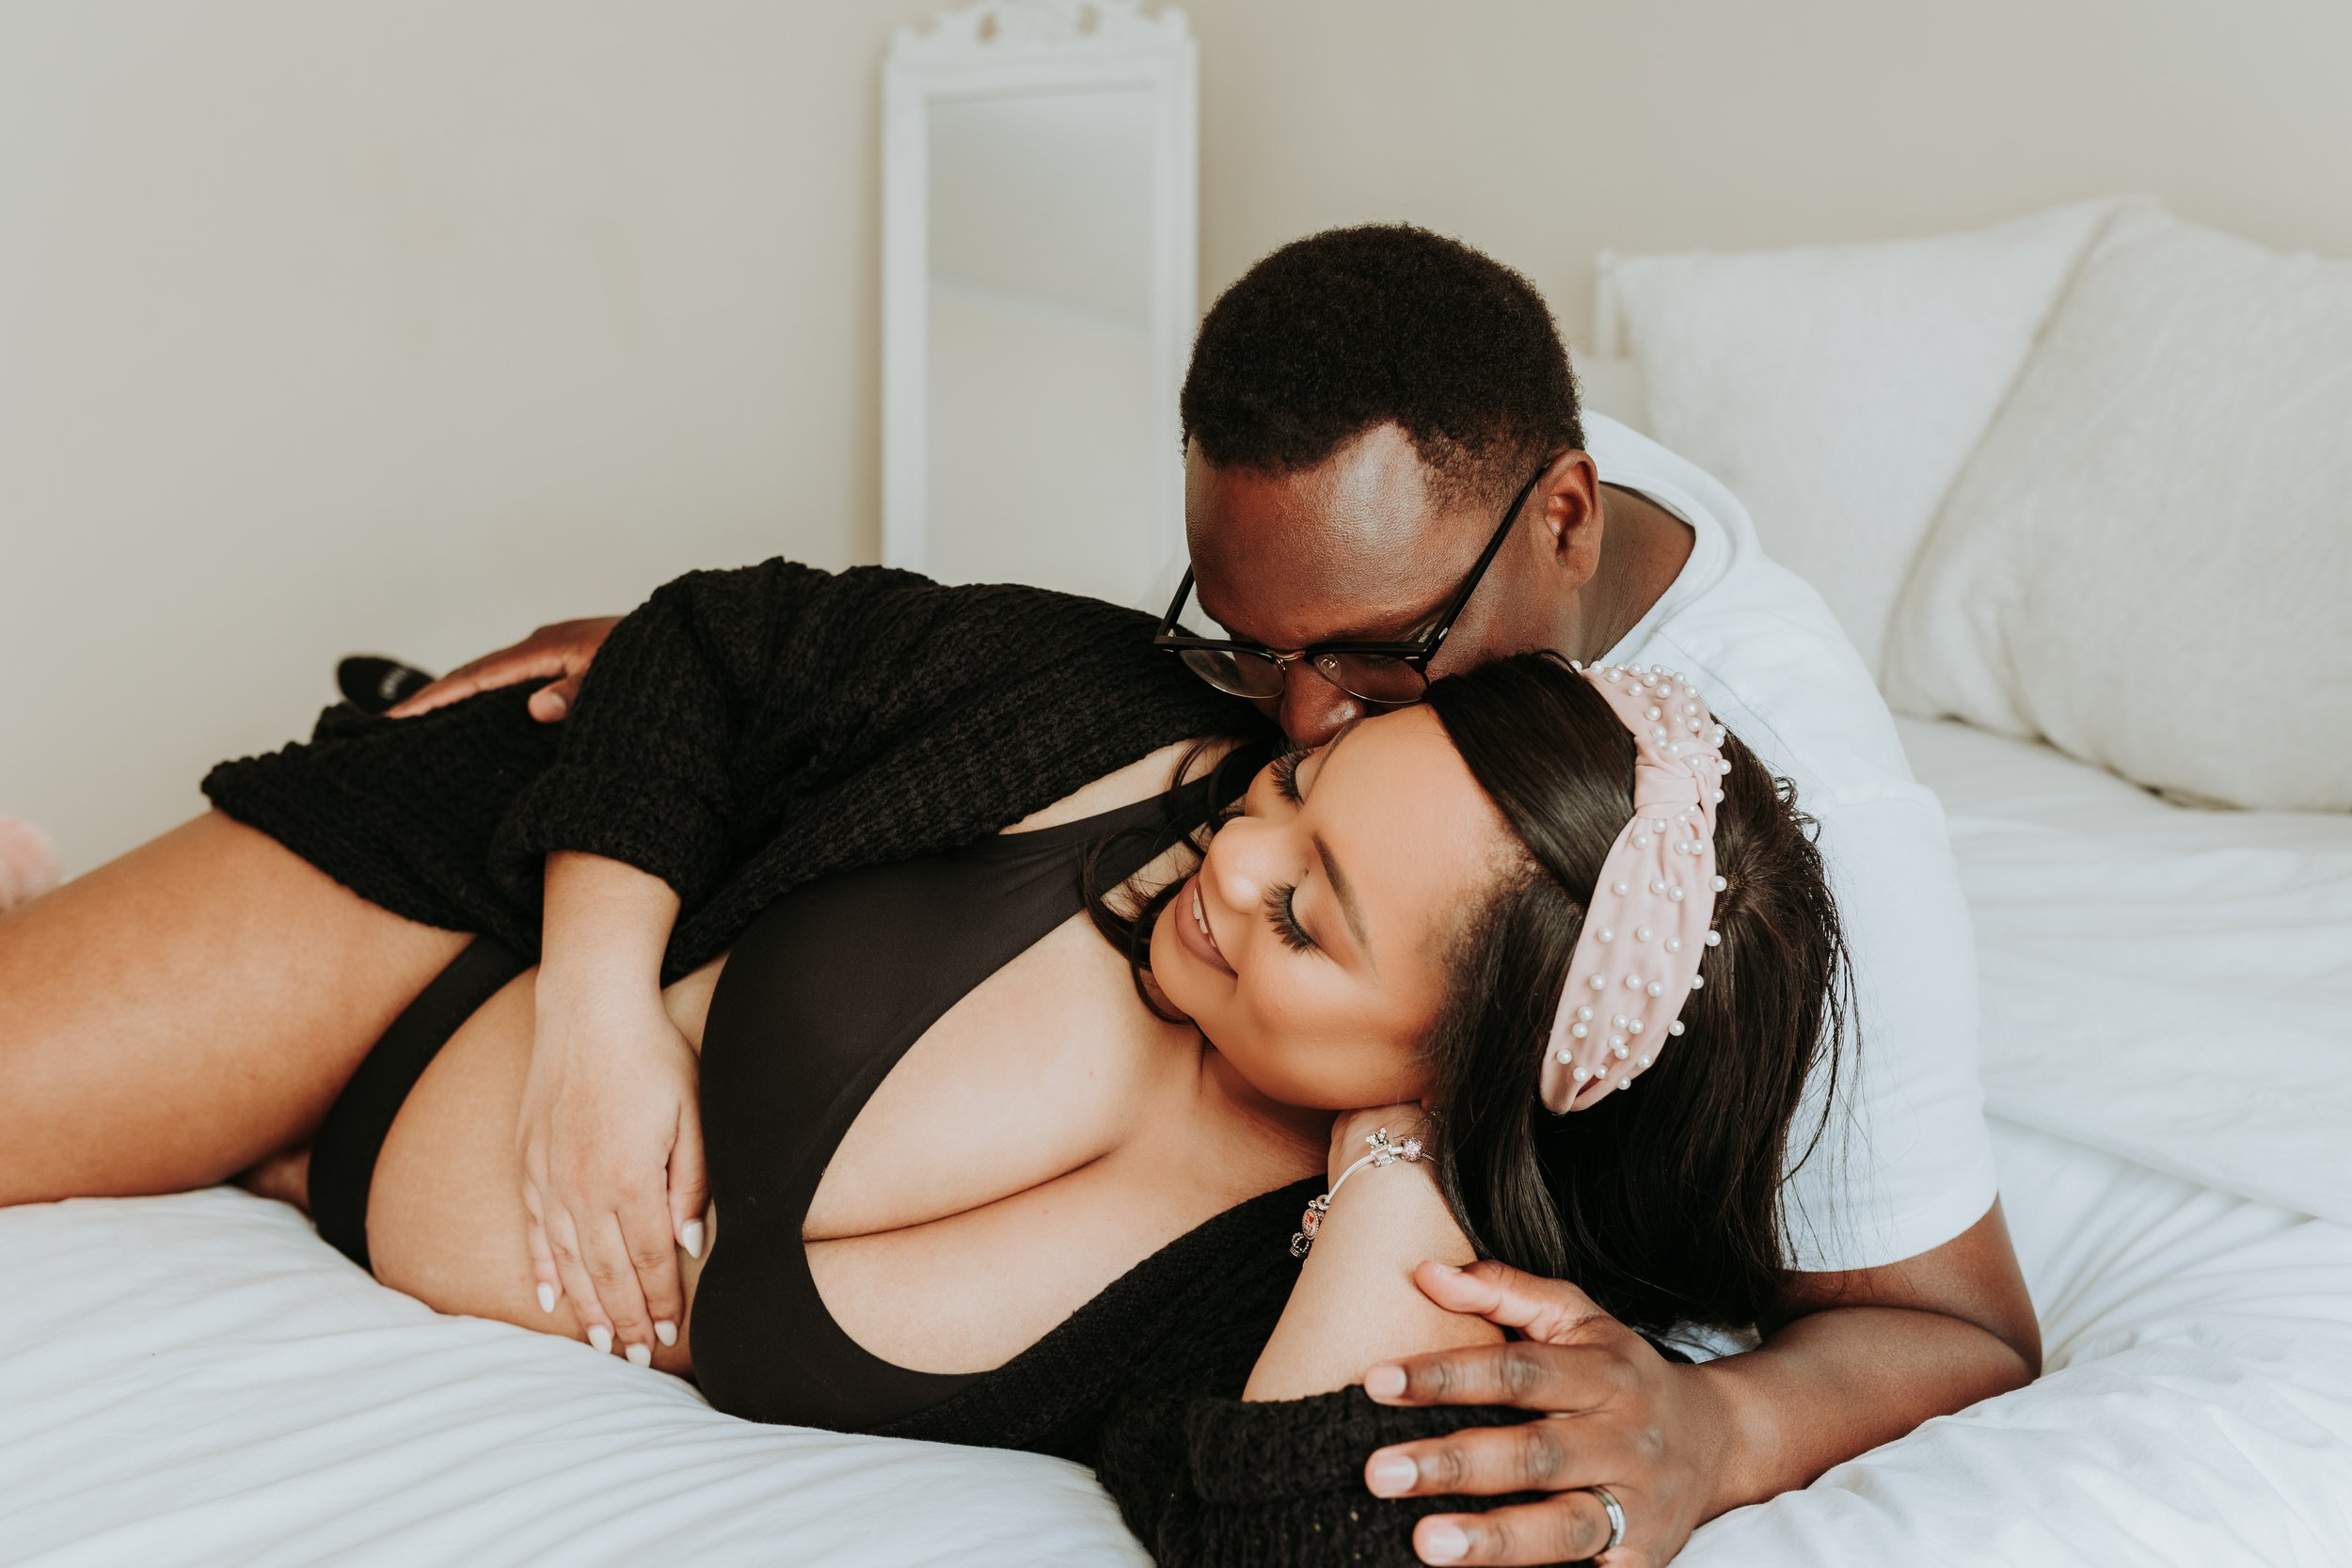 I feel so blessed to be looking at youCause when you open your eyesI feel alive- Maternity Couples Boudoir- nine19 photography Raleigh NC — Nine19 Photography image